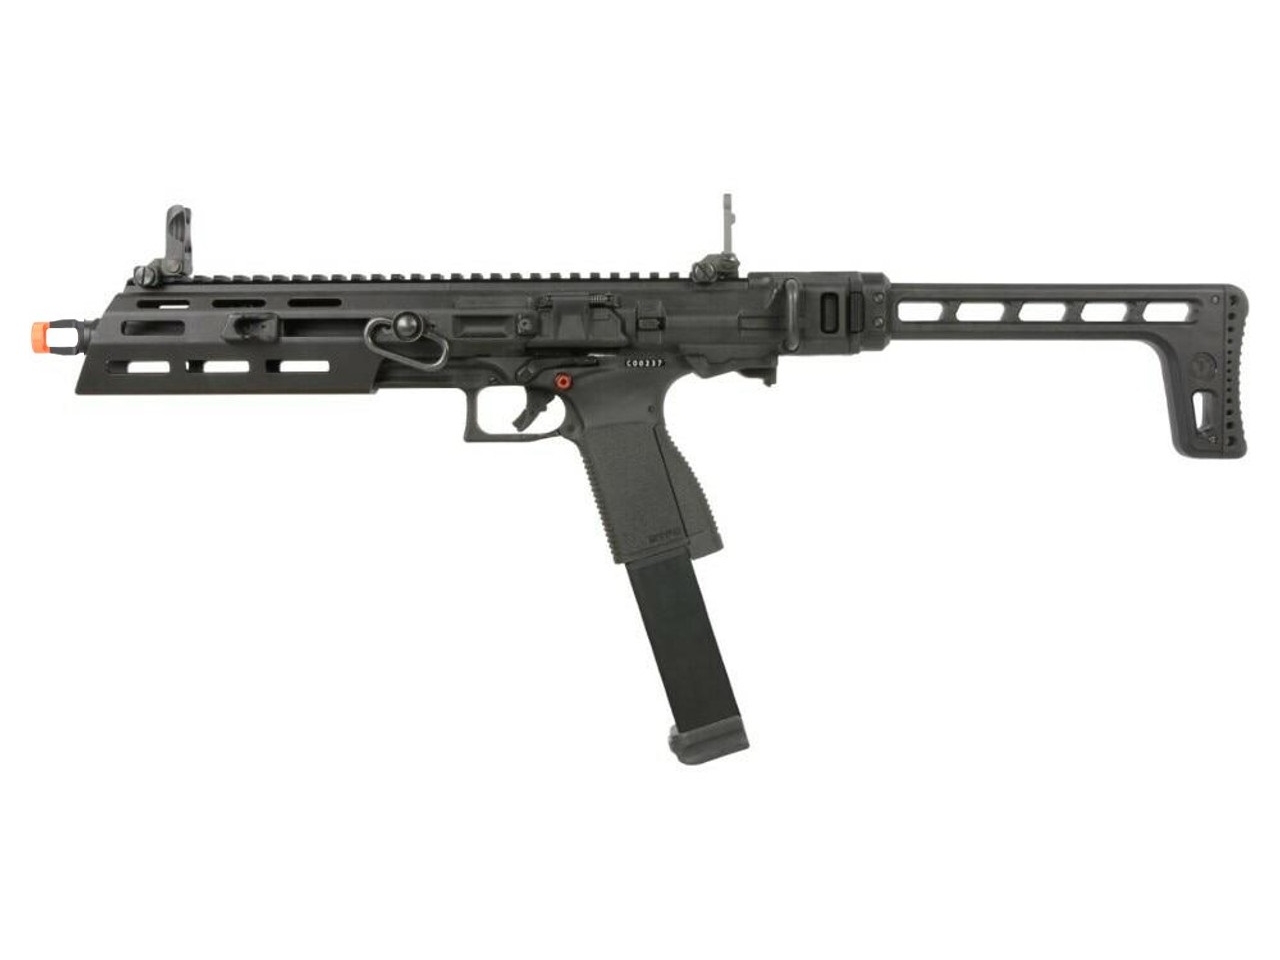 G&G SMC 9 Gas SMG Airsoft Carbine 6mm